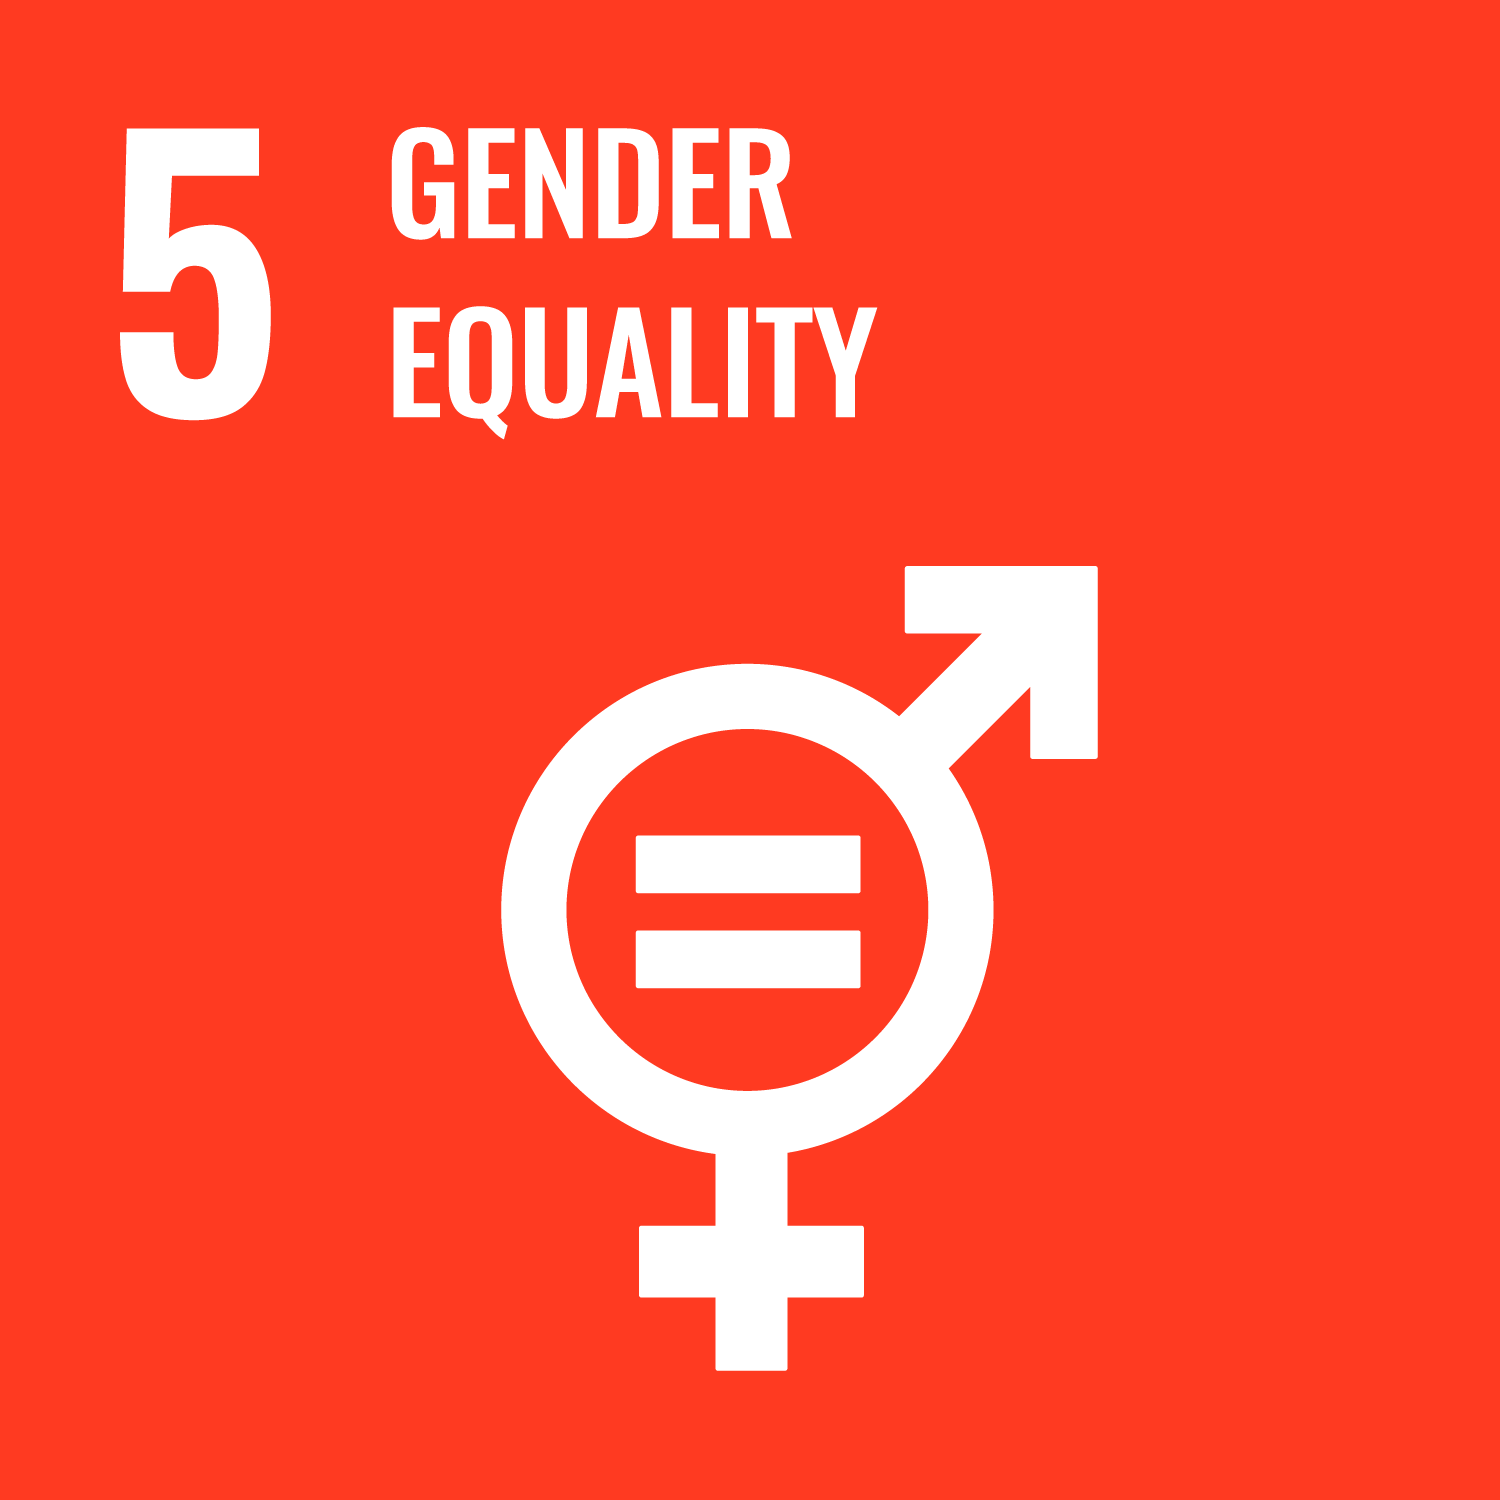 Promoting Gender Equality and Empowerment of Women